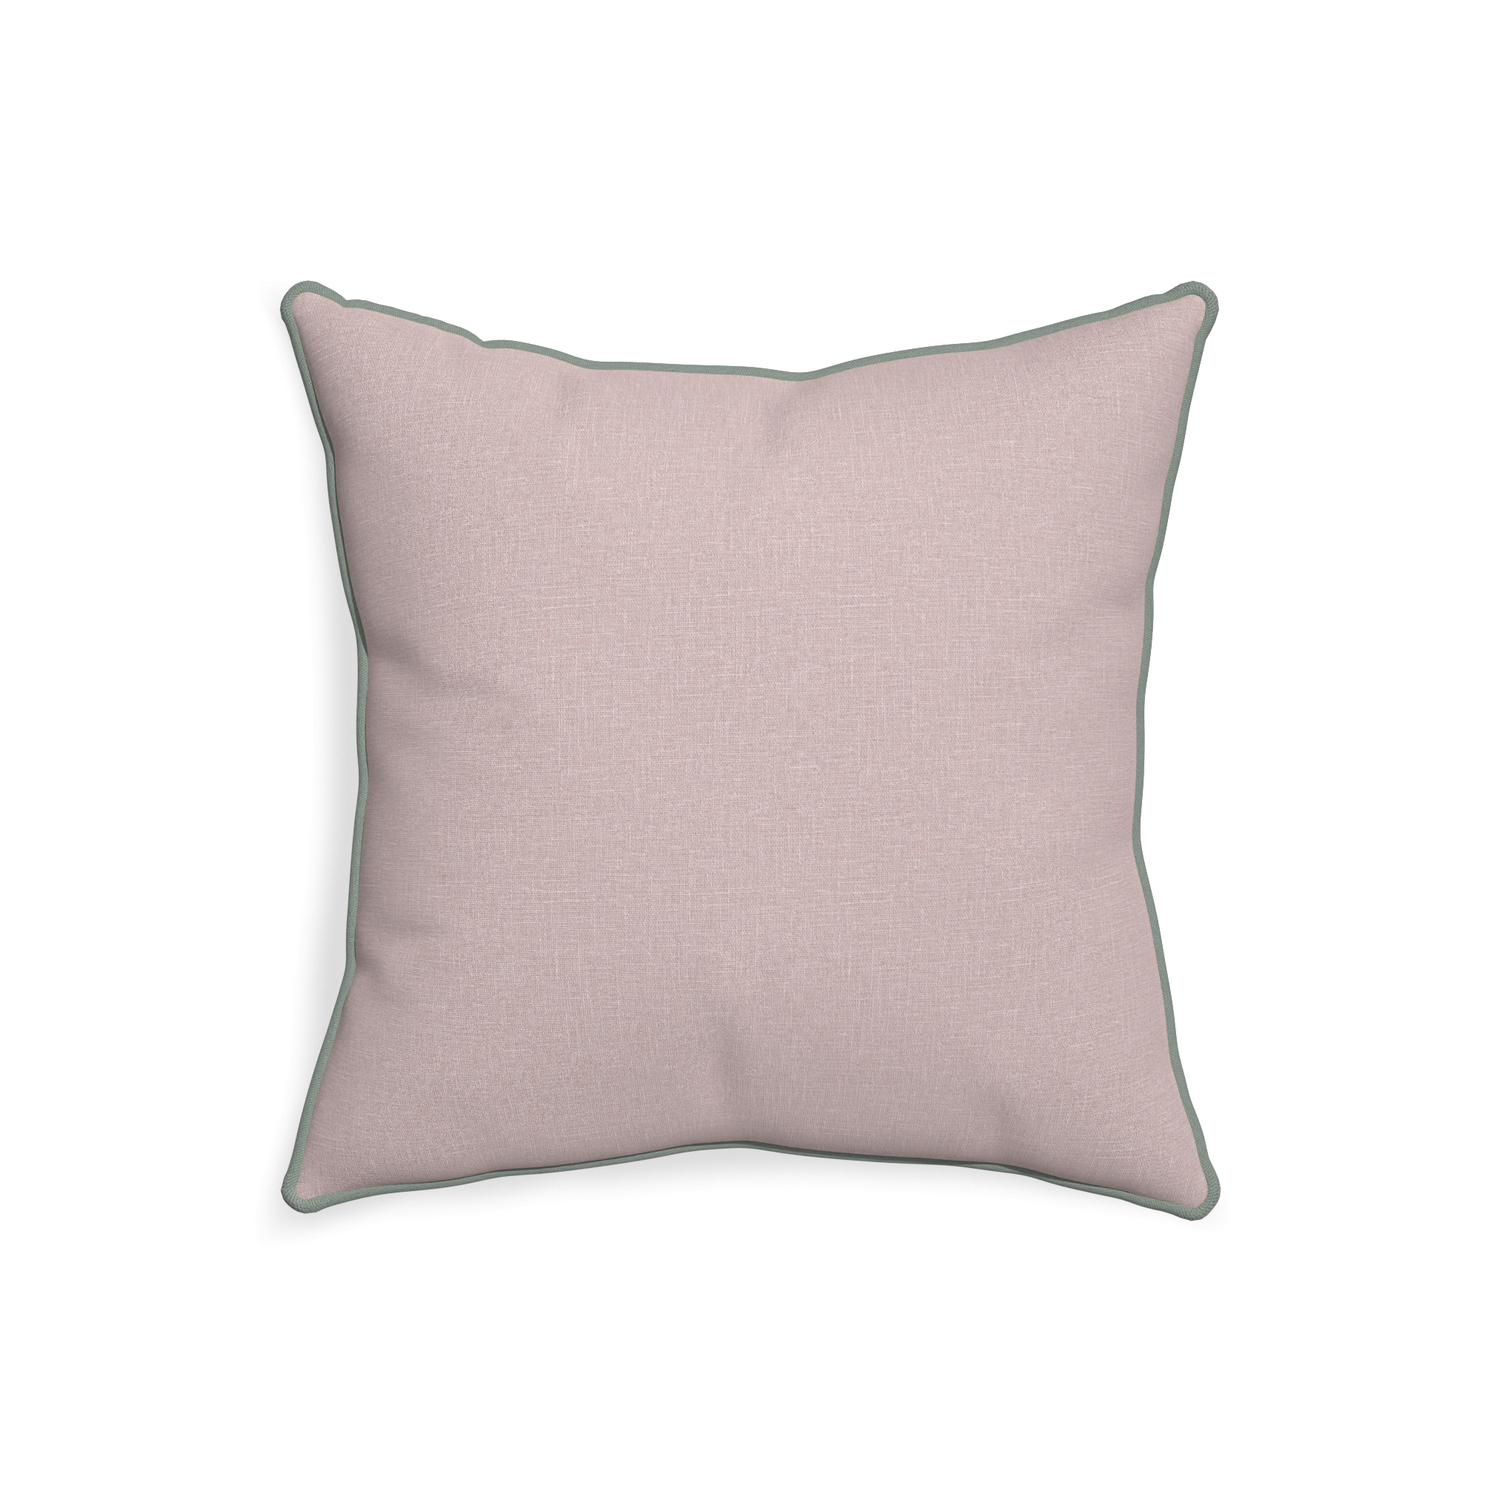 20-square orchid custom mauve pinkpillow with sage piping on white background